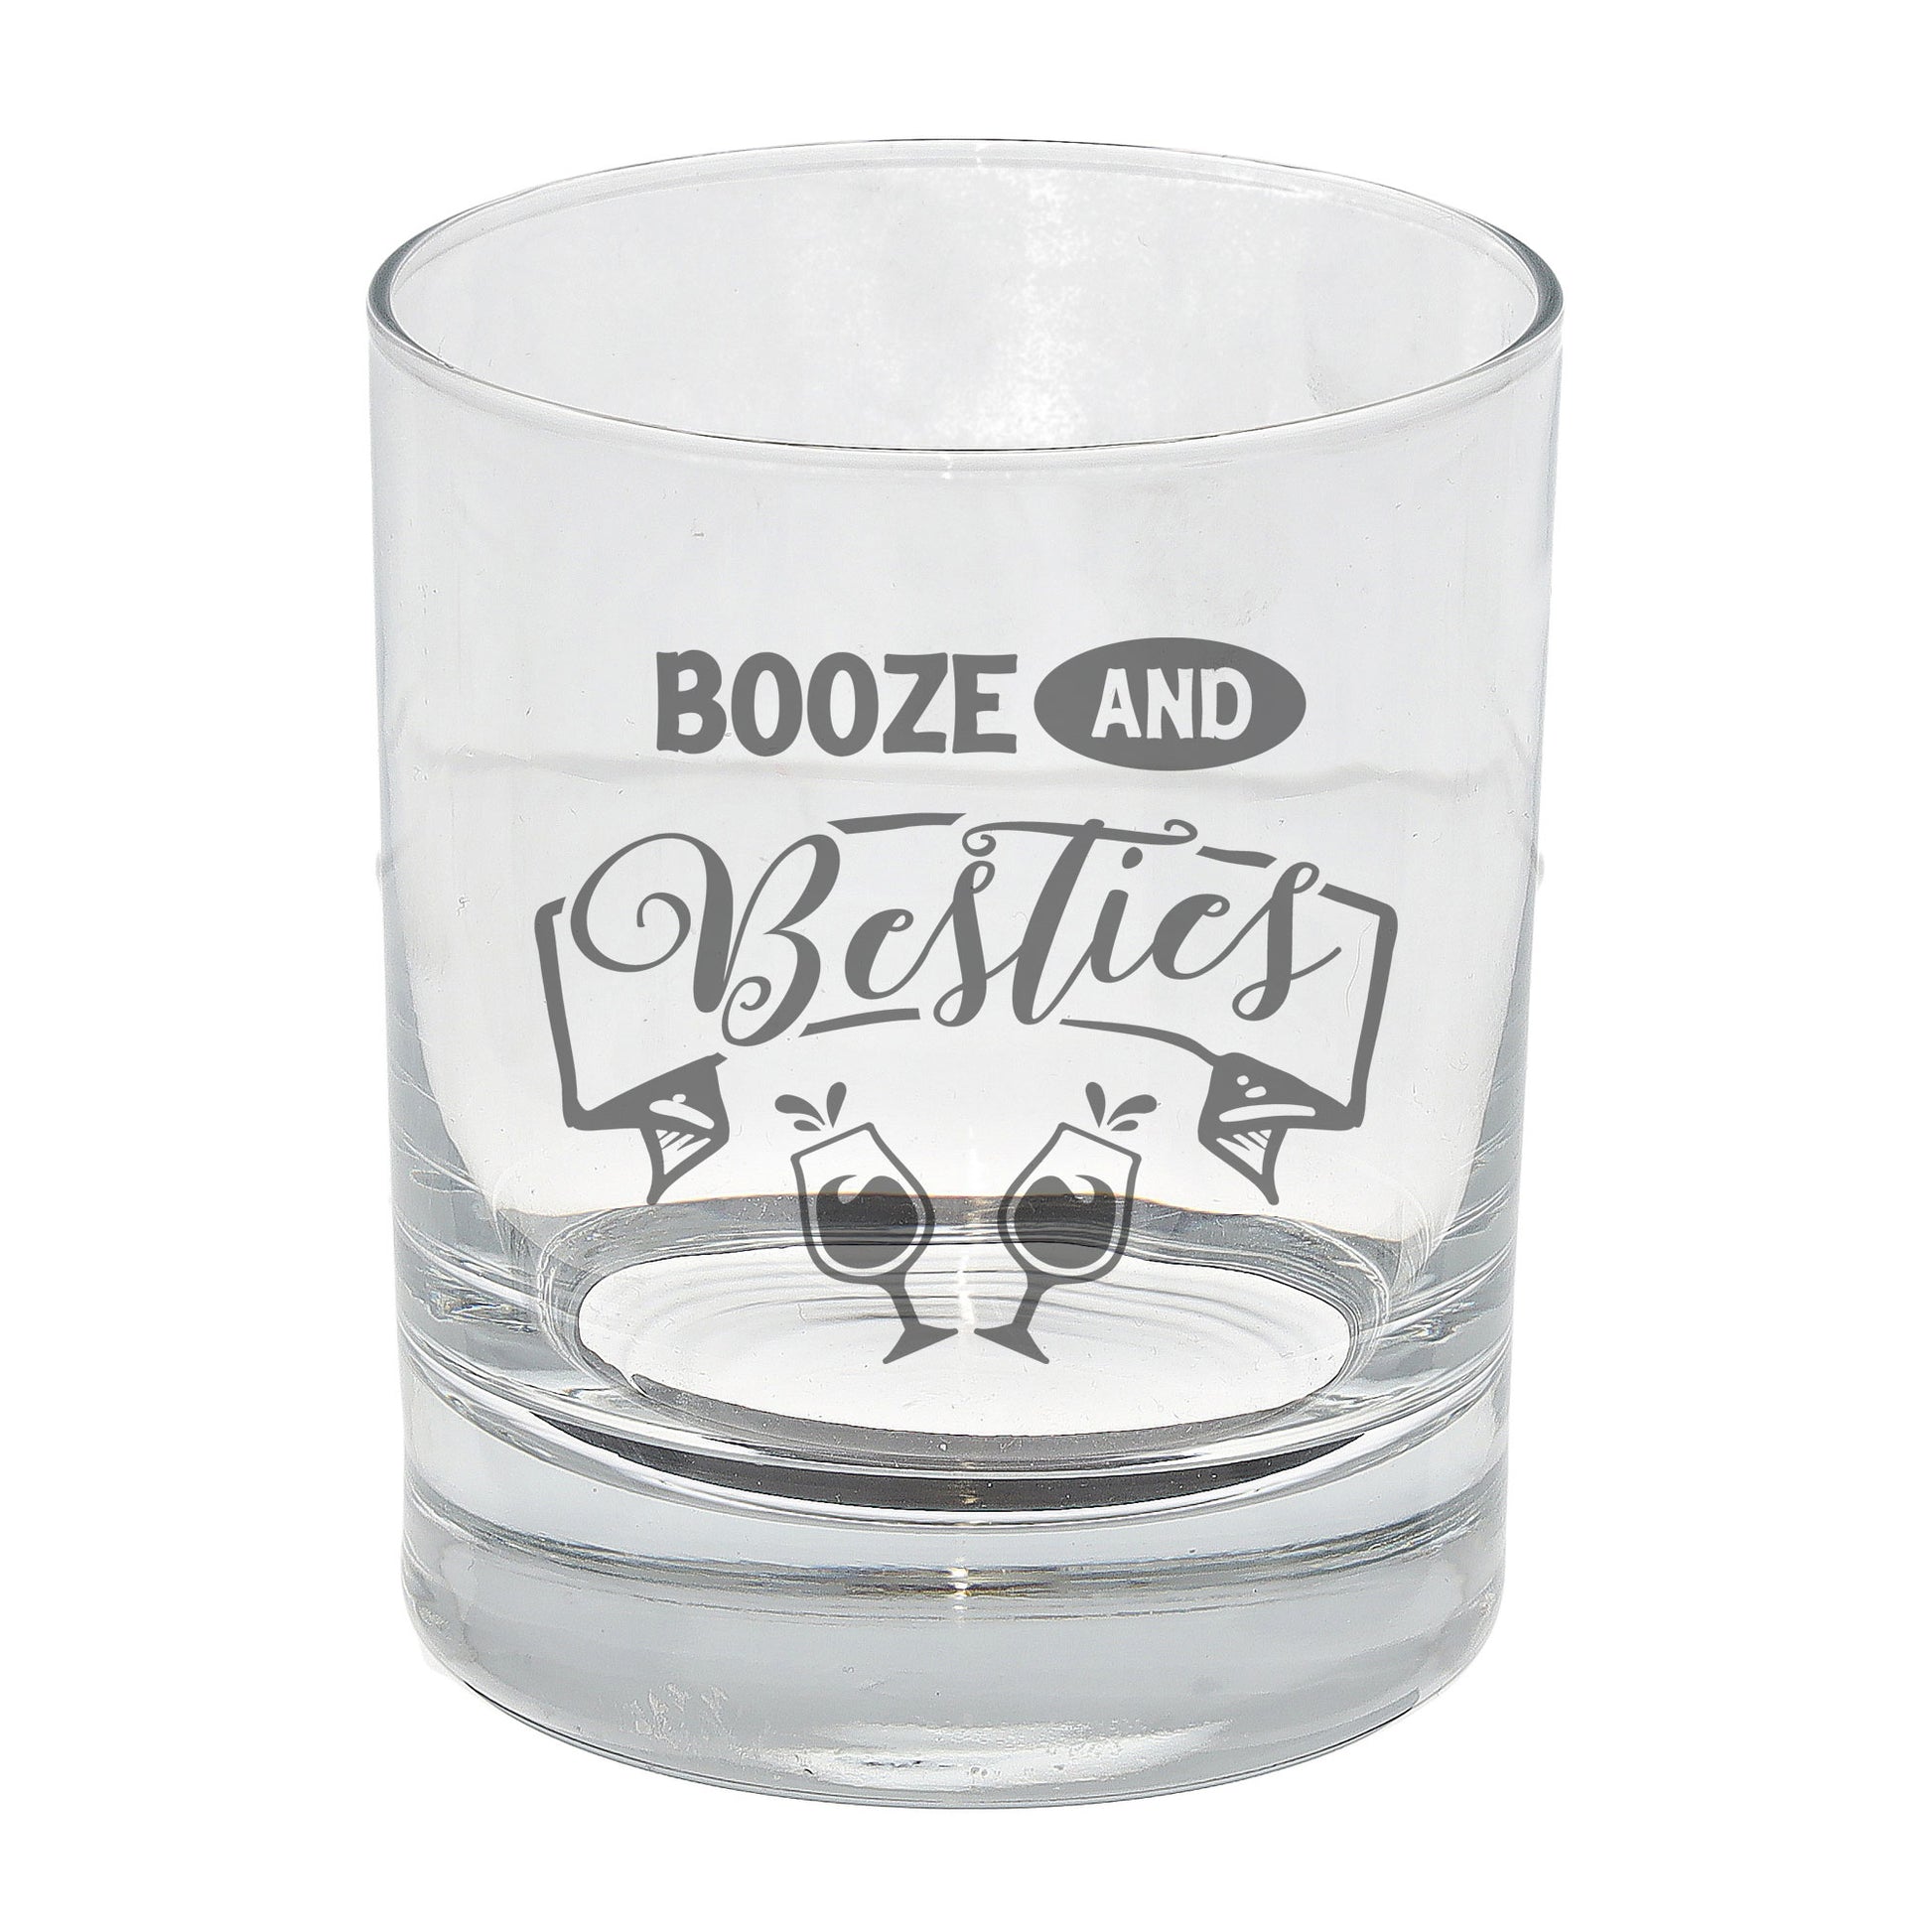 Booze And Besties Engraved Whisky Glass and/or Coaster Set  - Always Looking Good - Whisky Glass Only  